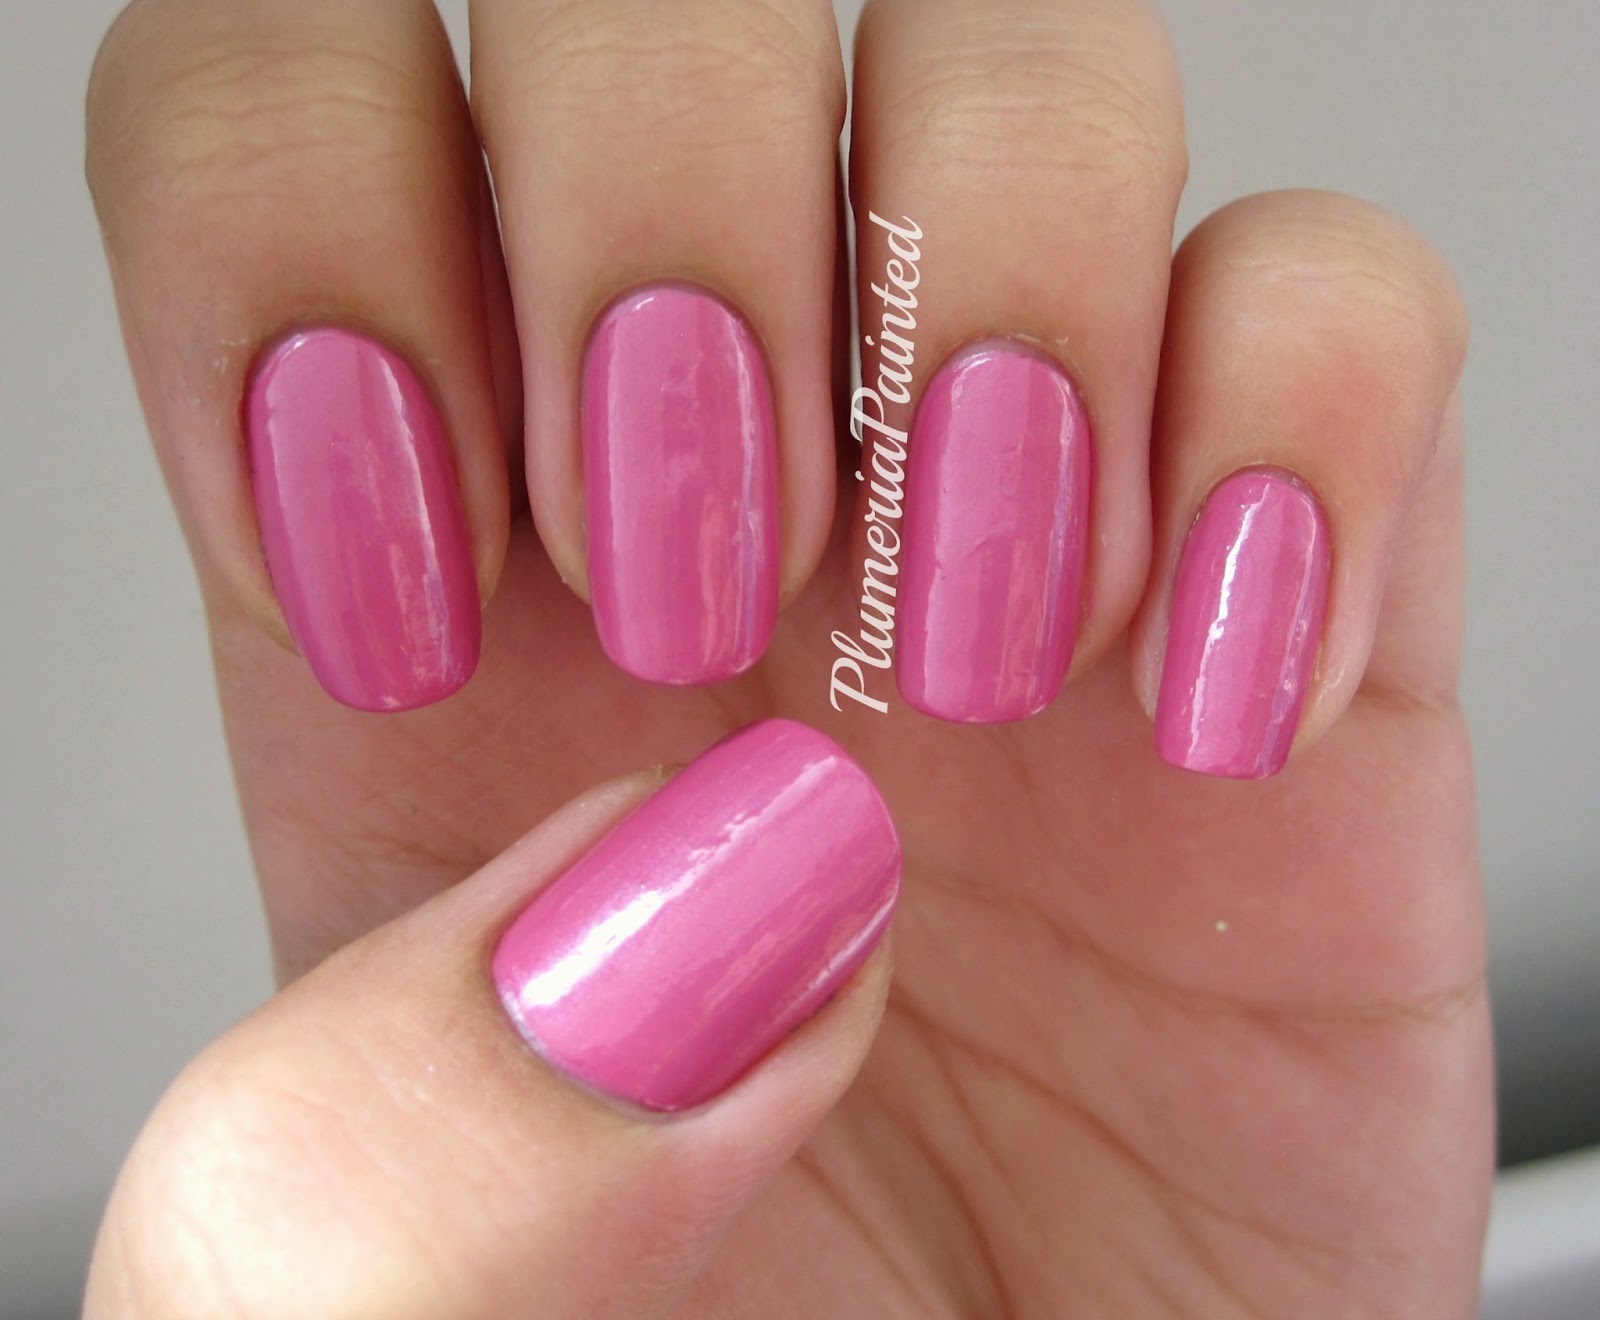 1. OPI GelColor Pink Nail Polish - wide 5